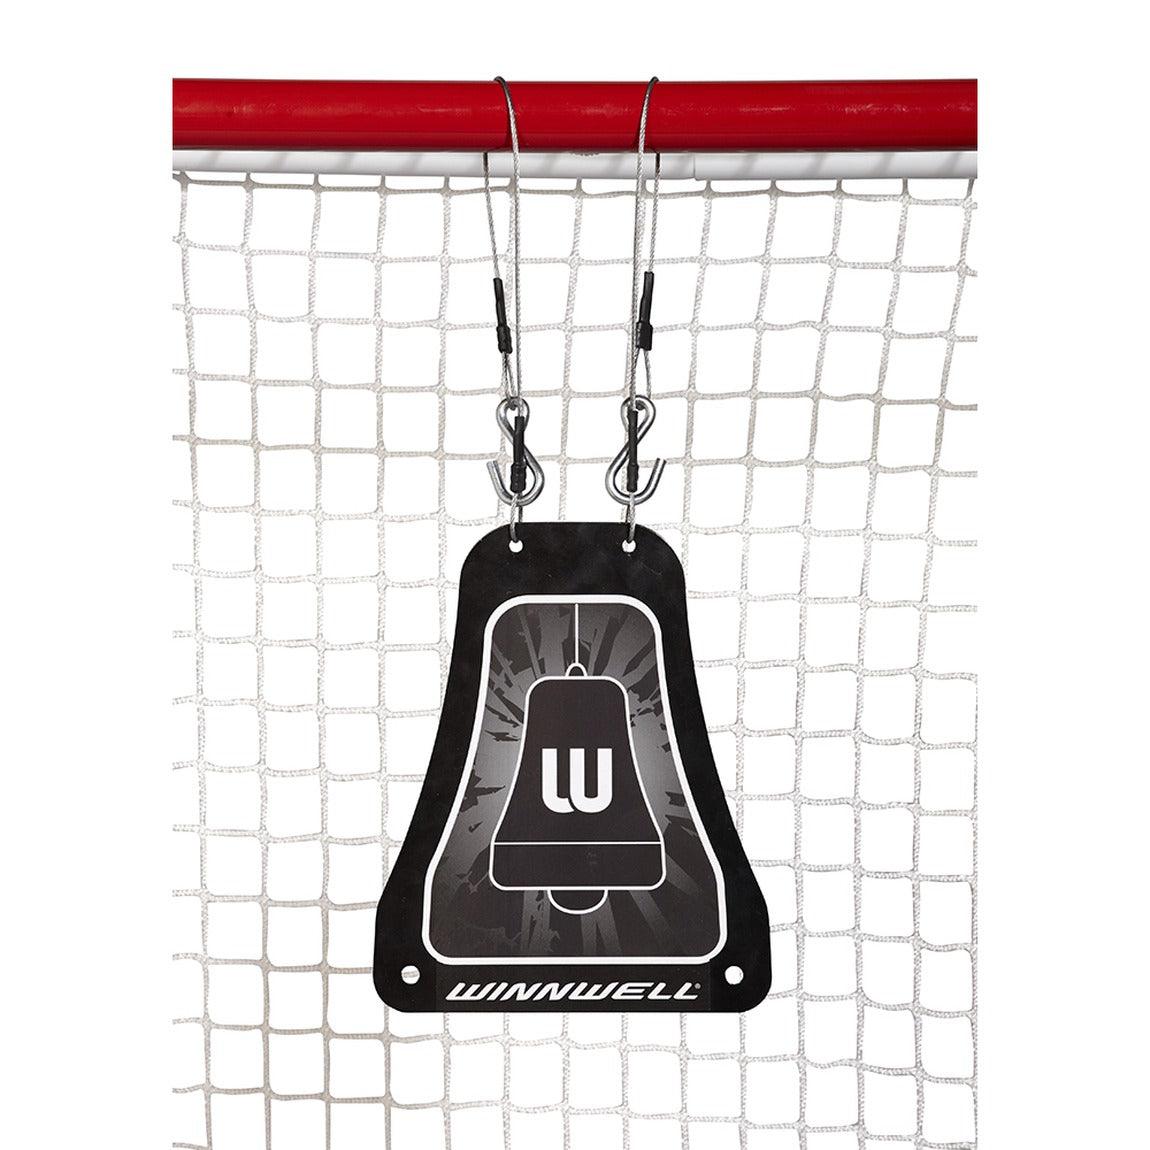 Hockey Metal Bell Shooting Target - Sports Excellence